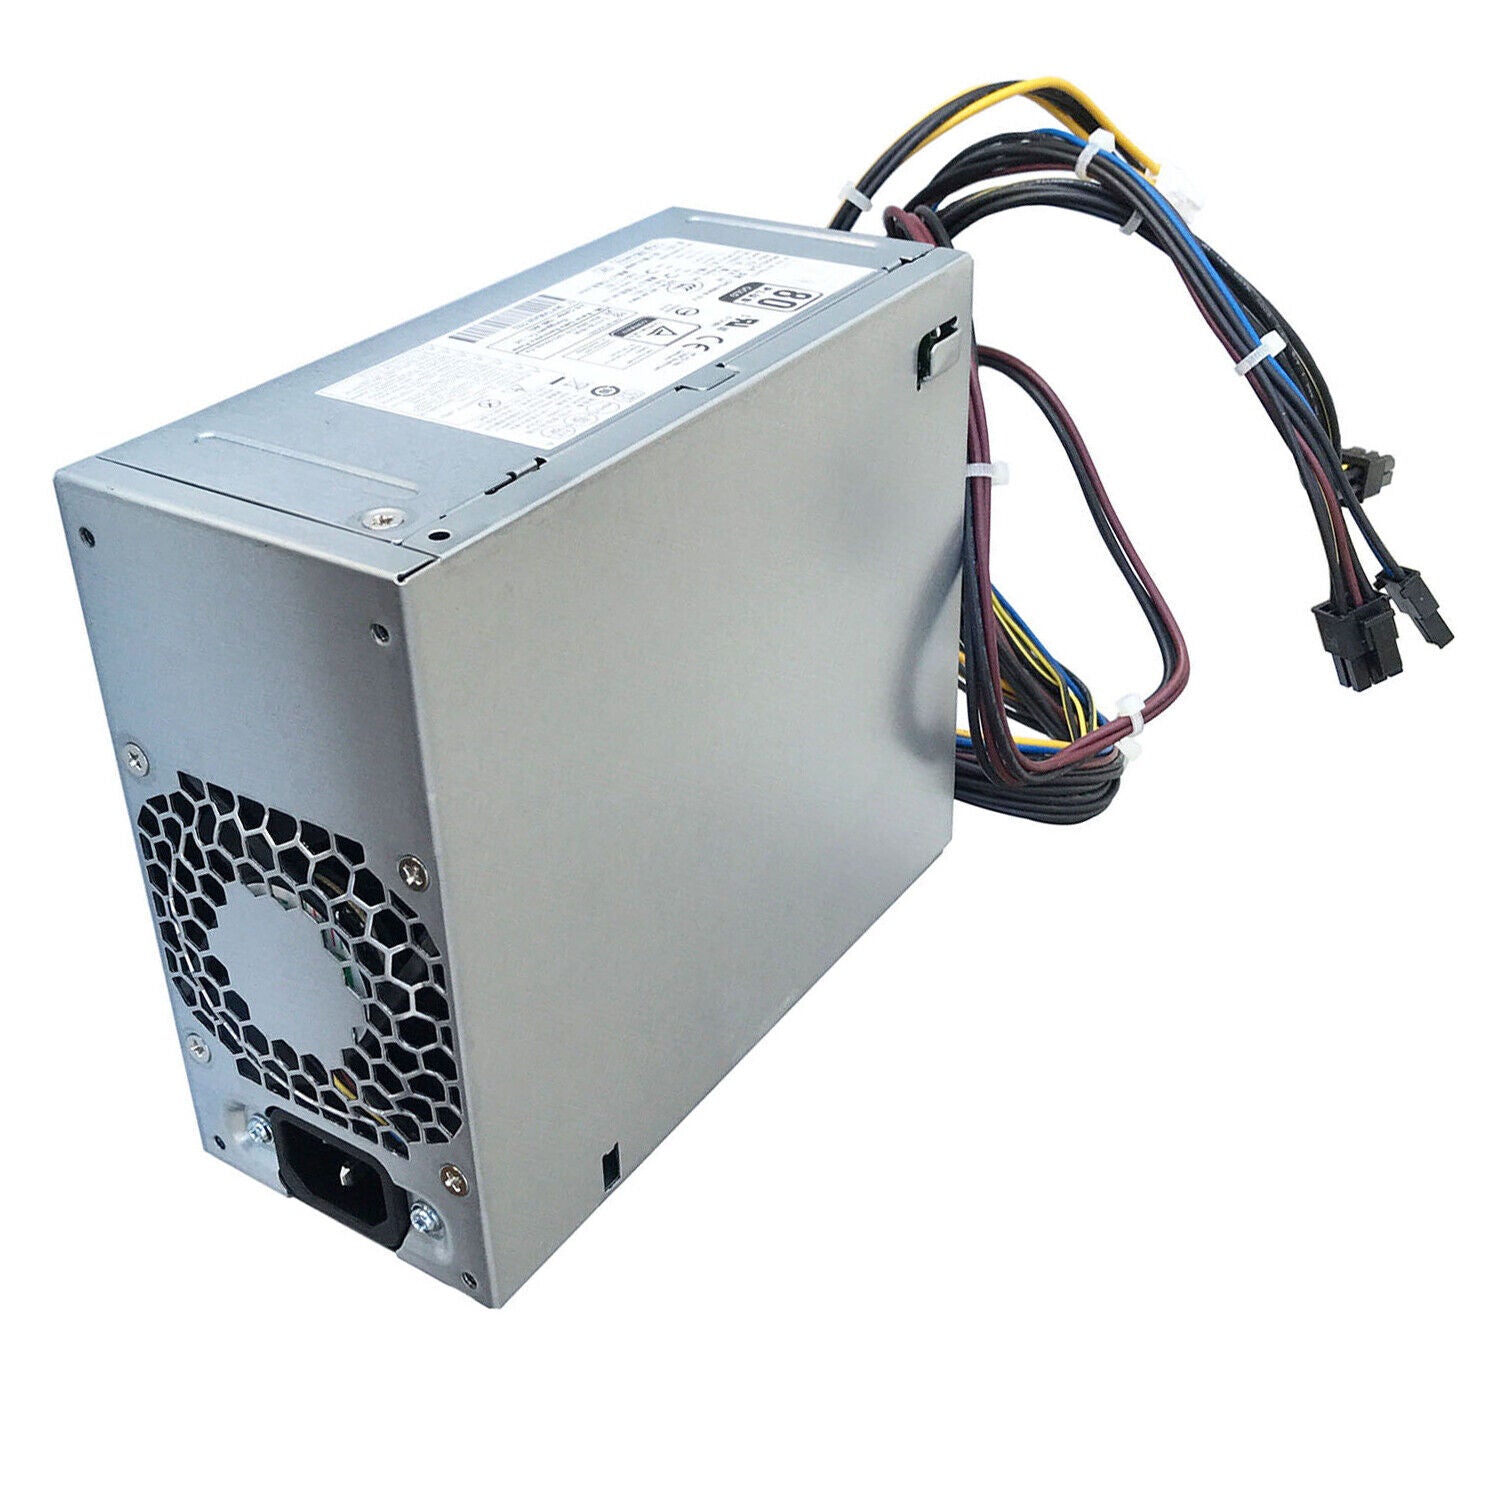 **Used Like New** HP / Delta 400W Z210 (619397-001 / 619564-001) Delta# DPS-400AB-A13A Power Supply.